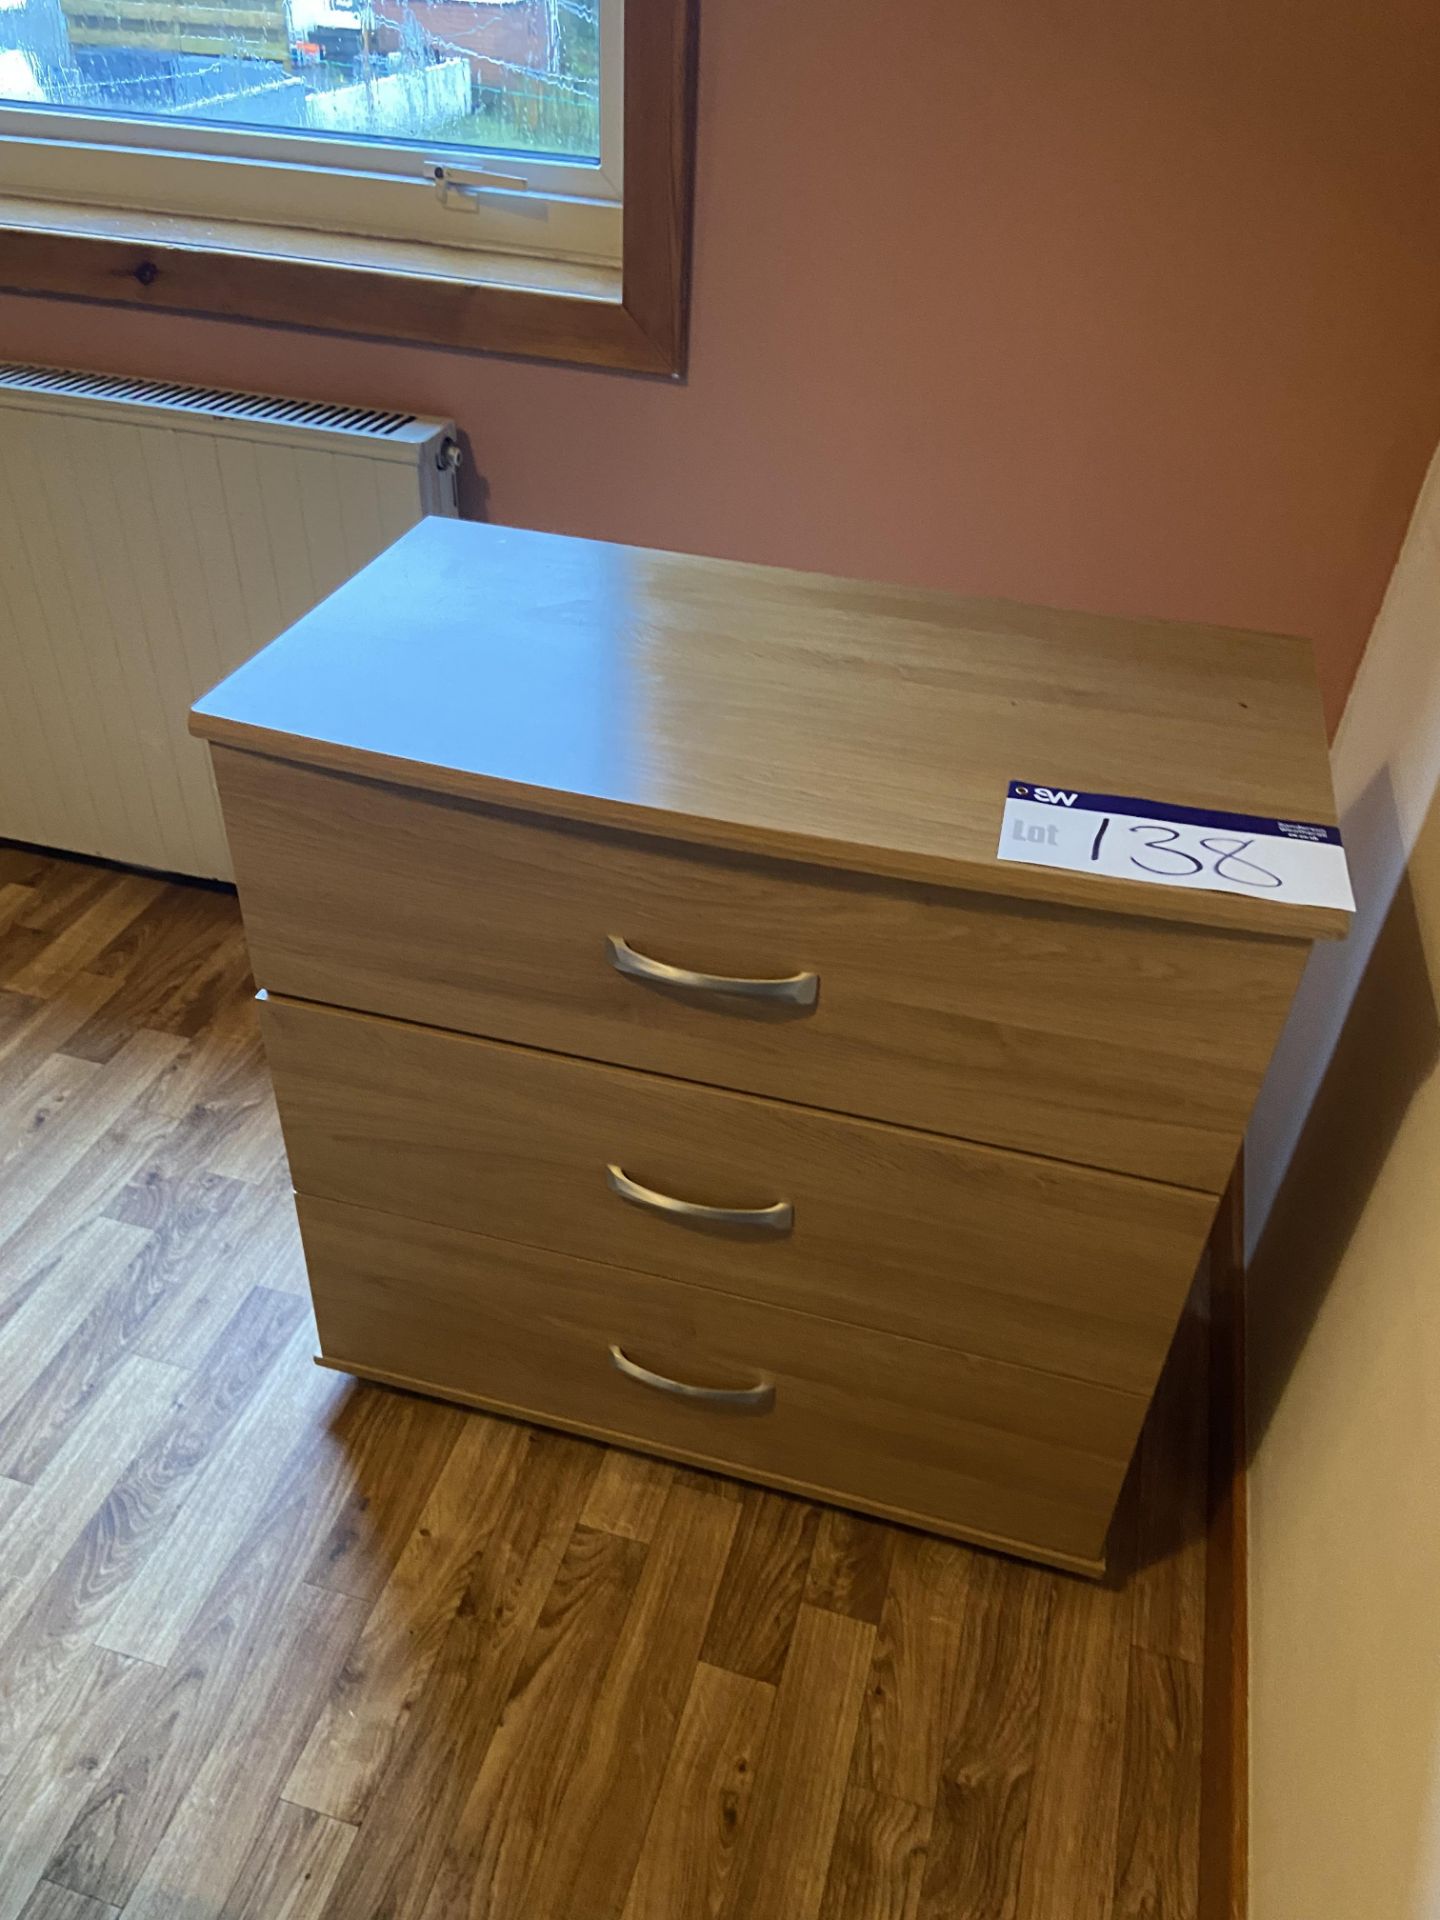 Remaining Bedroom Furniture, including oak laminated wardrobe, three drawer chest-of-drawers and two